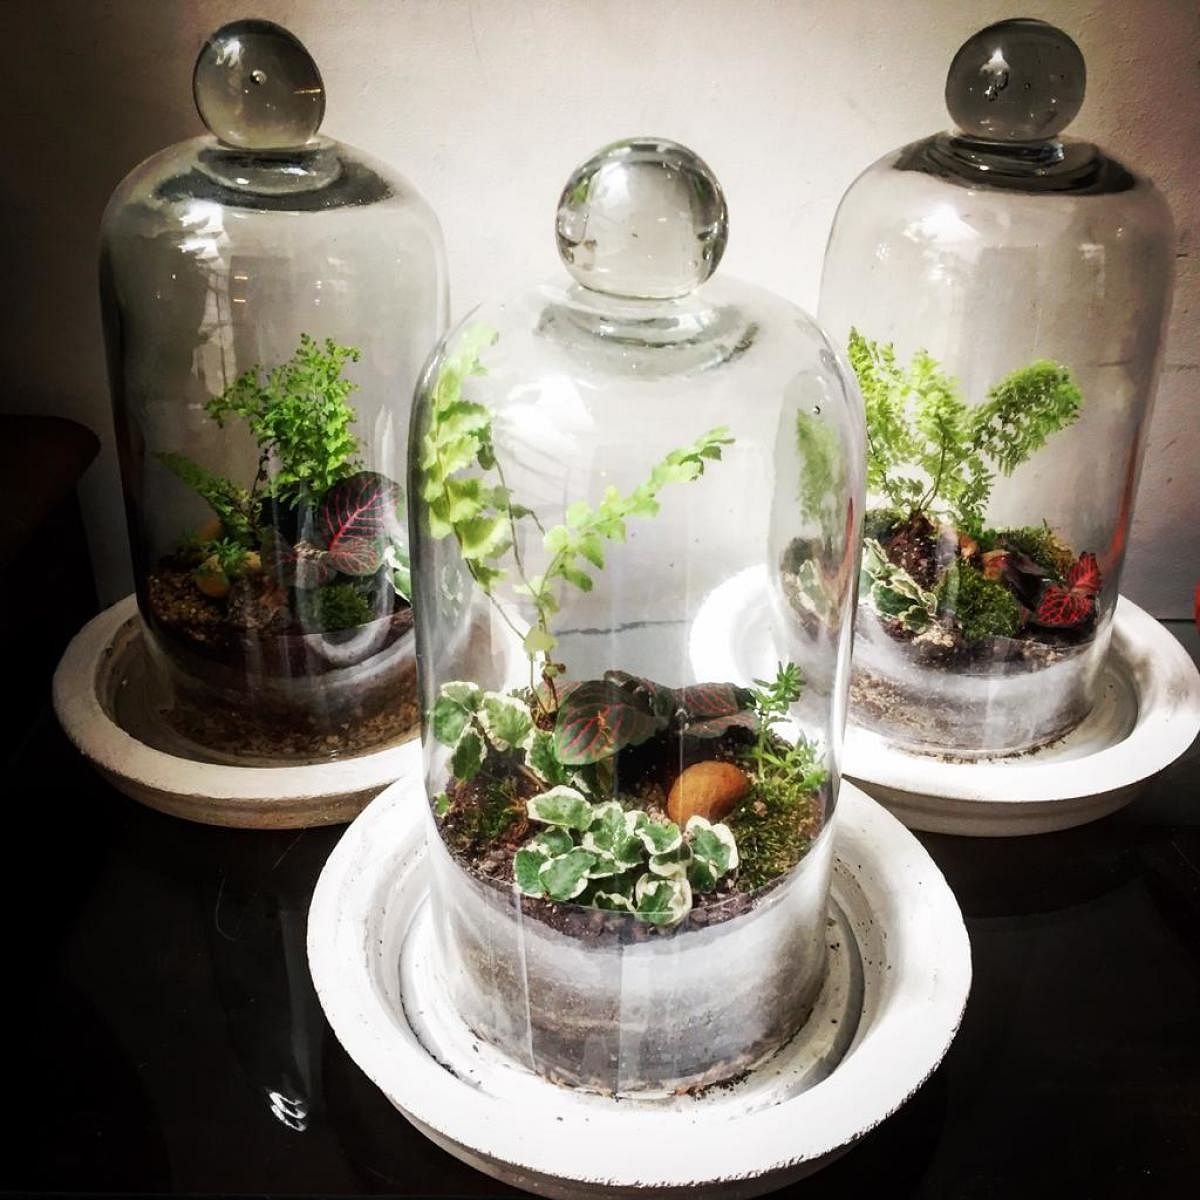 Each terrarium has to get the balance of all the elements just right.